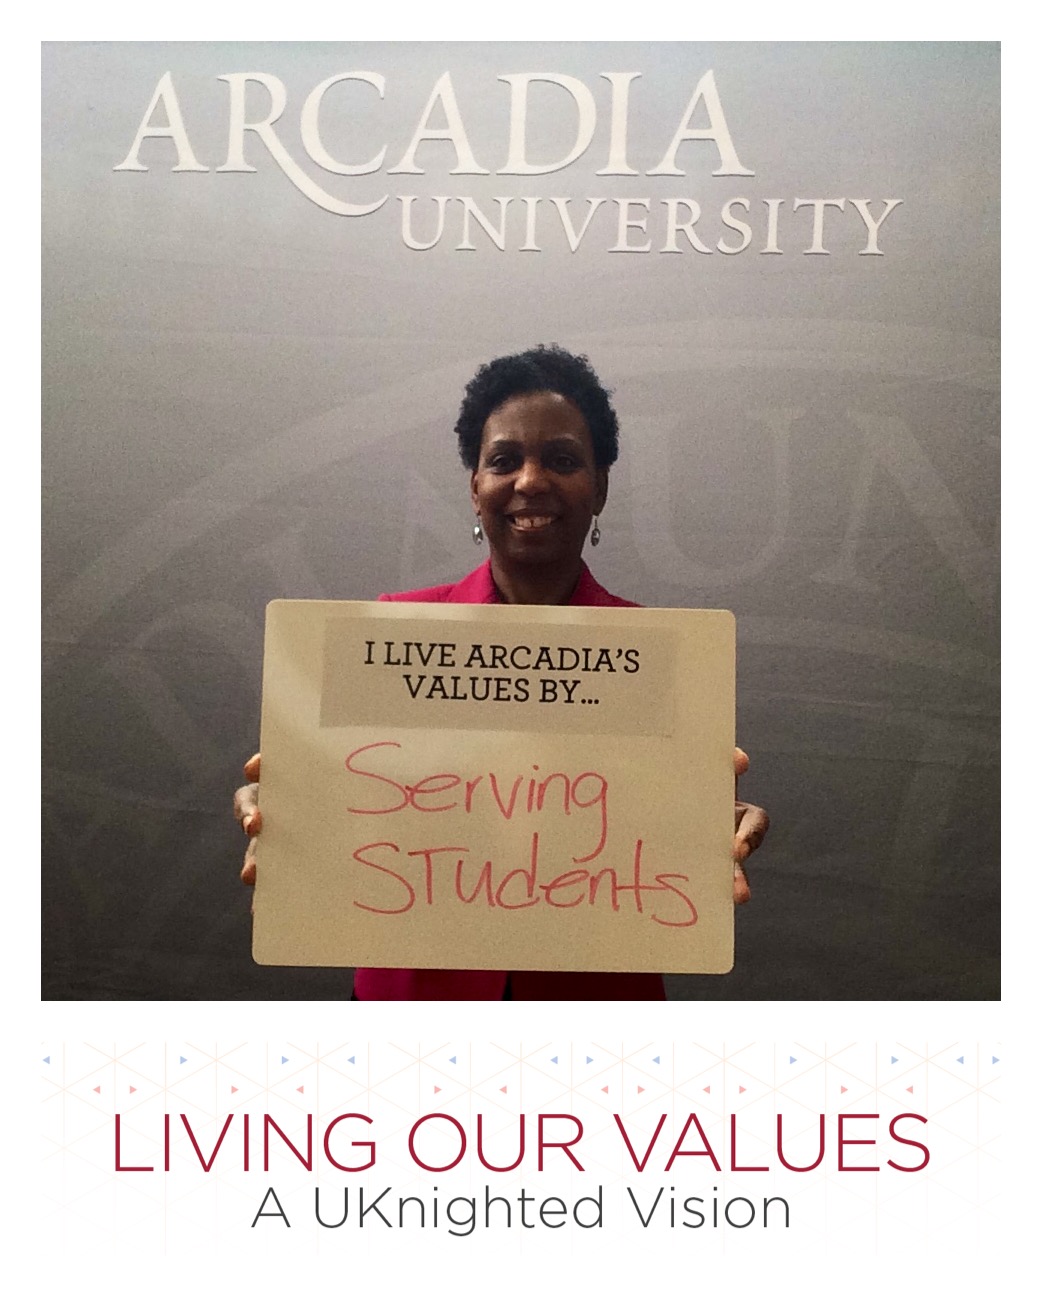 A faculty member lives Arcadia's value by serving students.